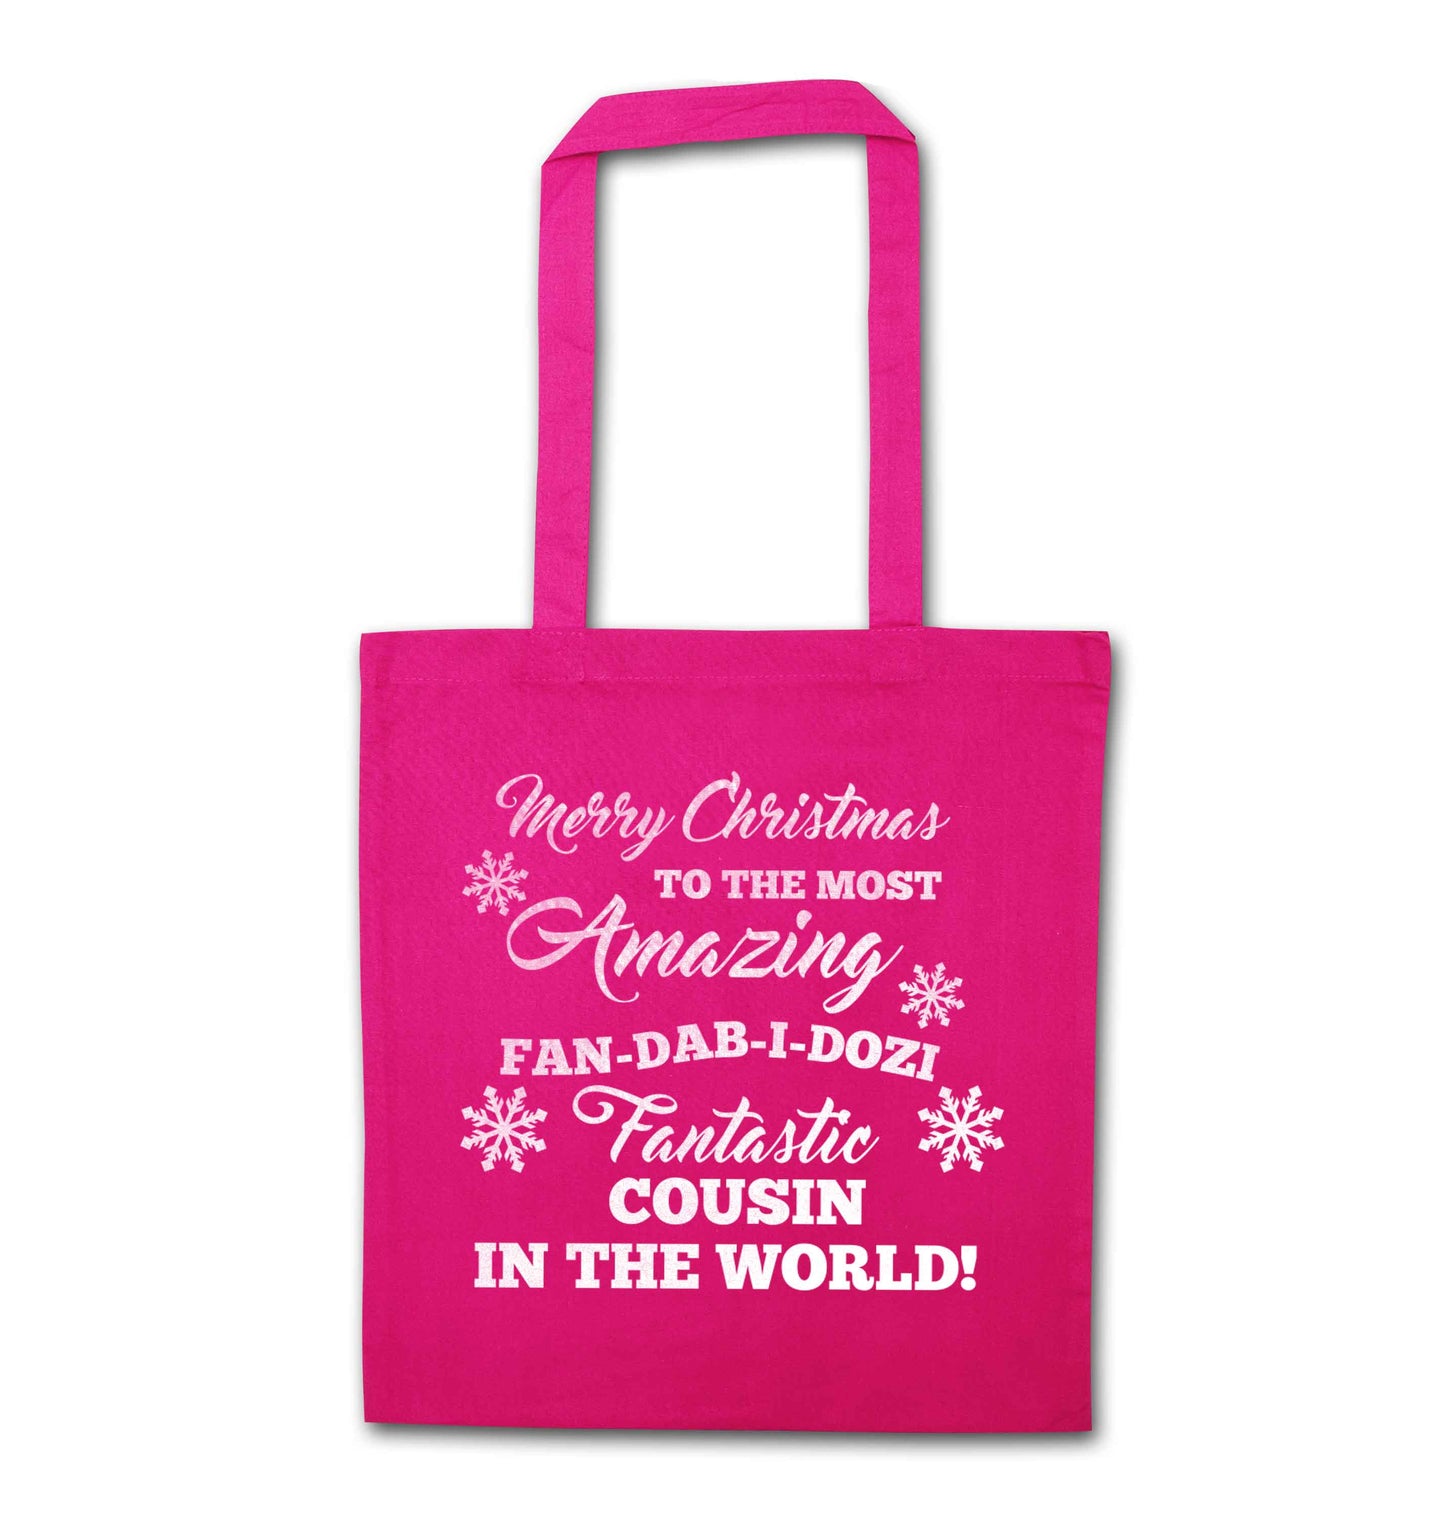 Merry Christmas to the most amazing fan-dab-i-dozi fantasic Cousin in the world pink tote bag